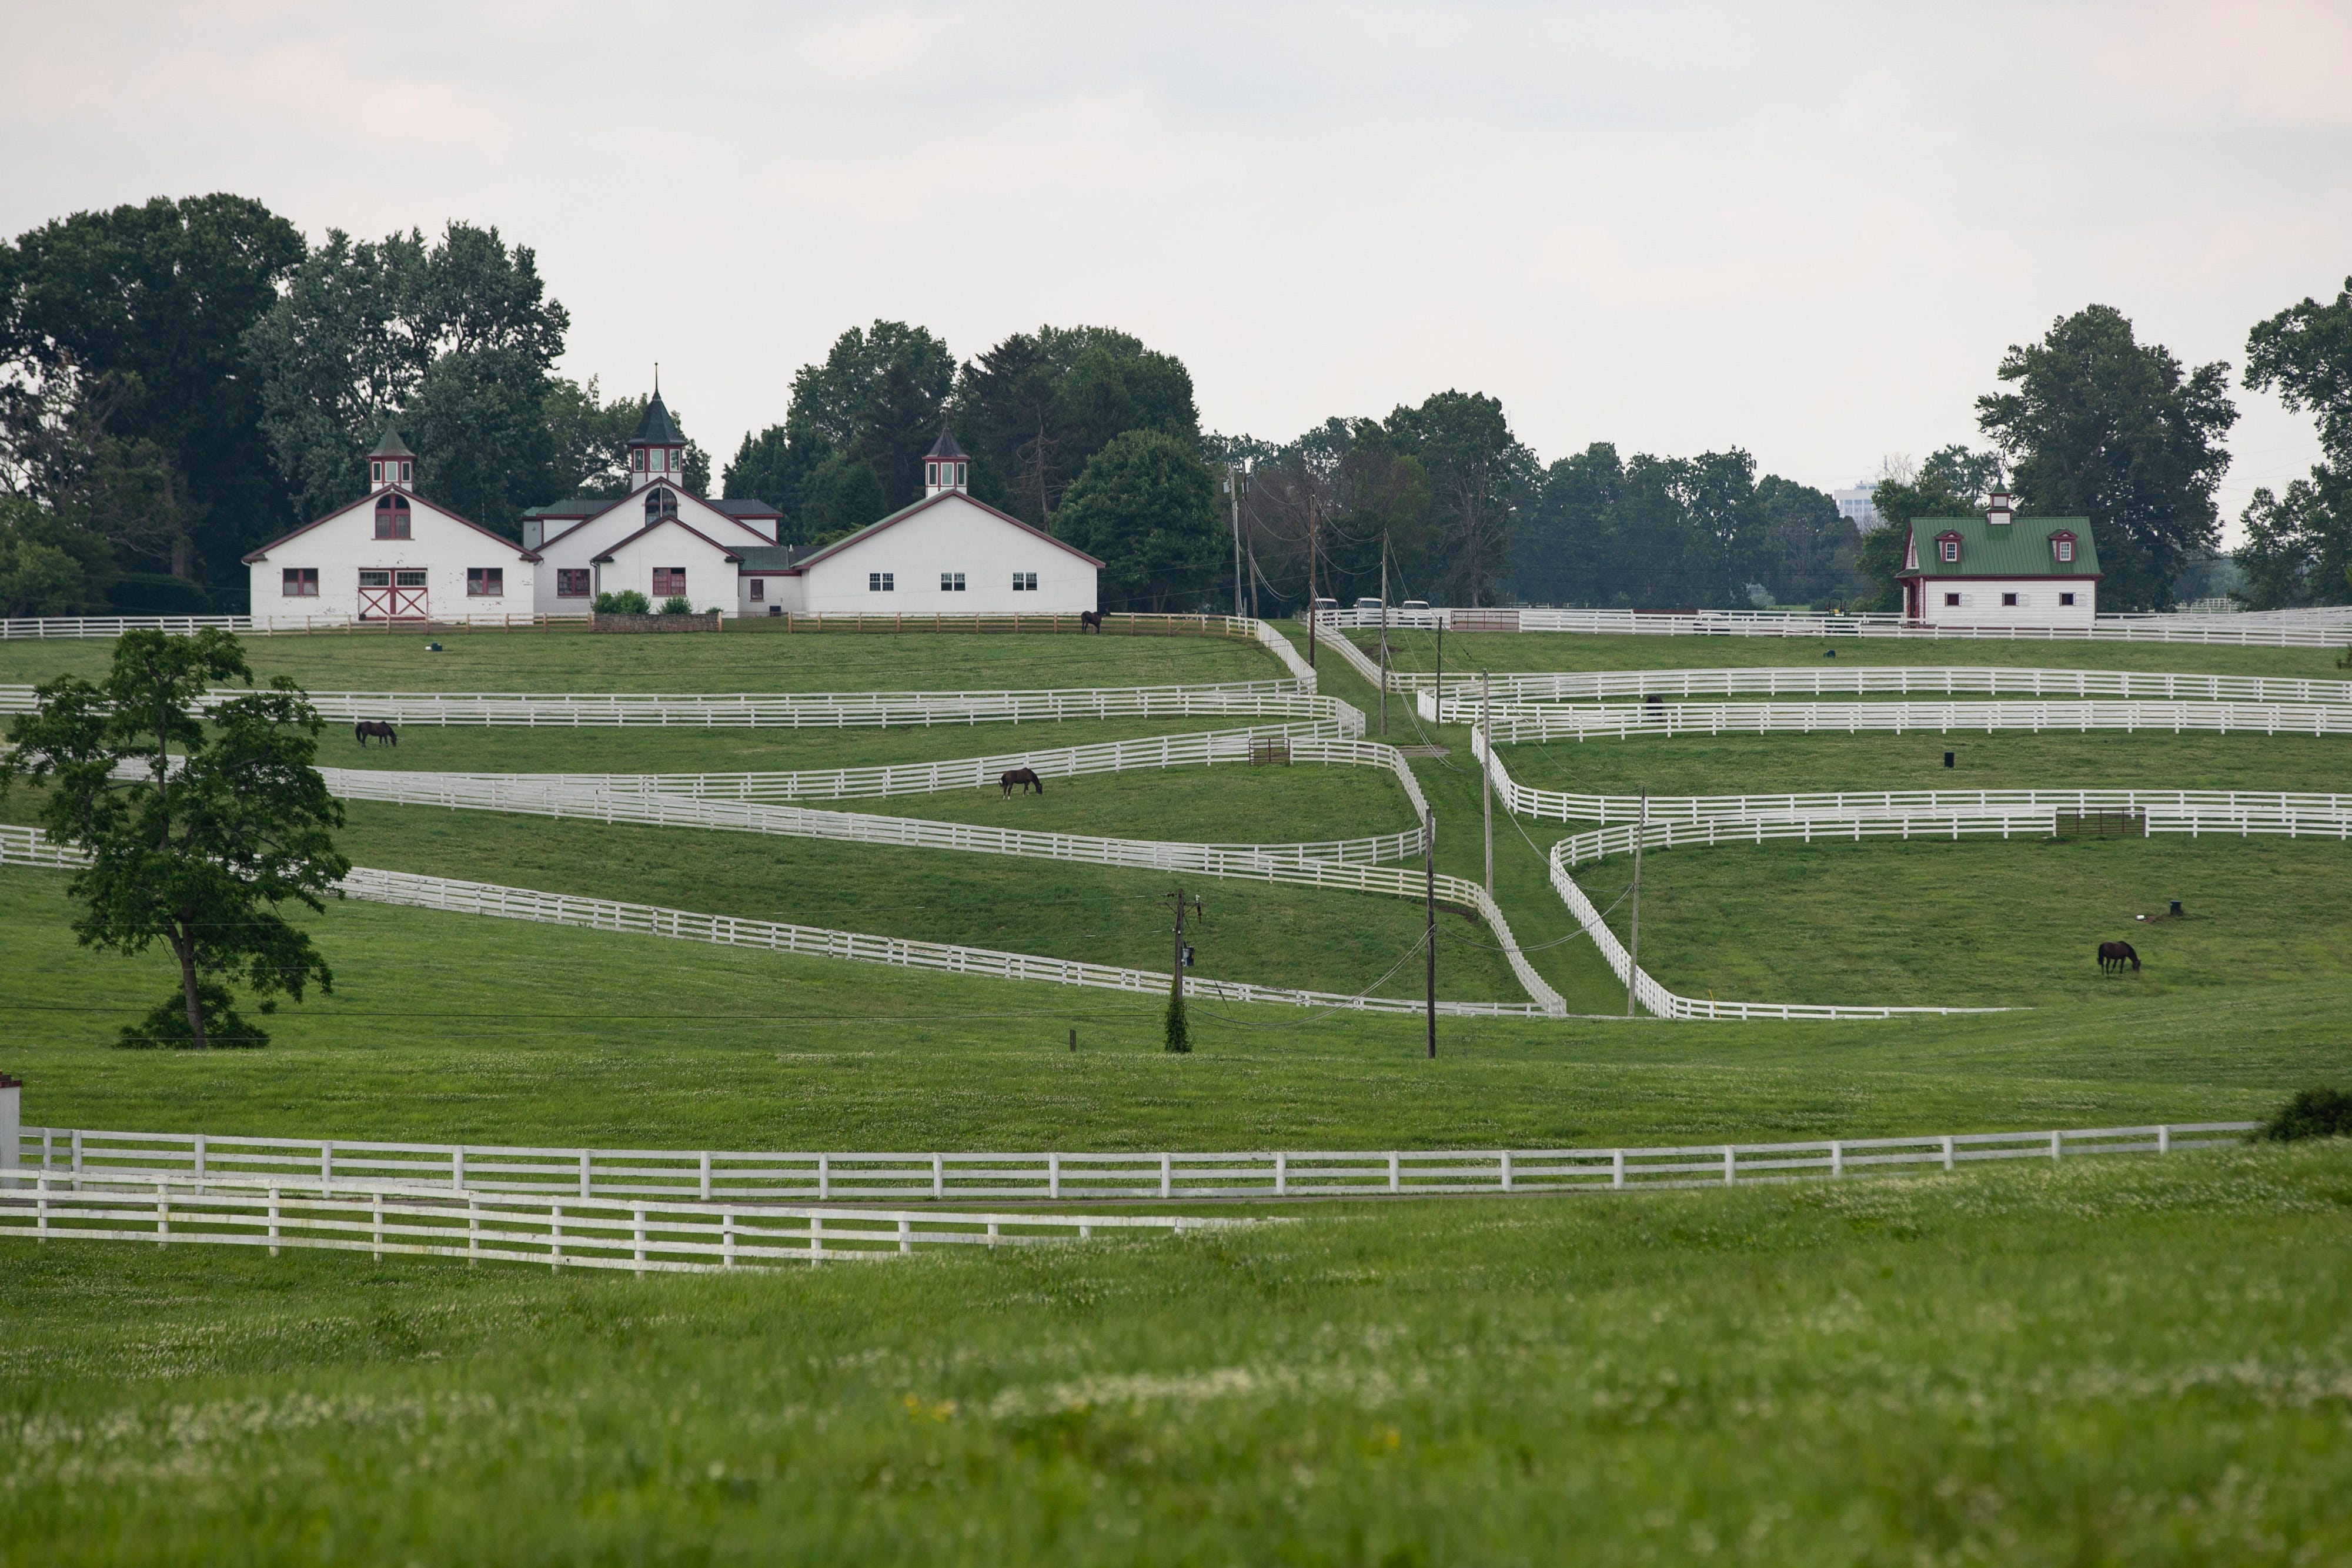 A Courier Journal investigation found that a member of CJNG worked at Lexington, Kentucky's famed Calumet Farm, home to eight Kentucky Derby and three Triple Crown winners.